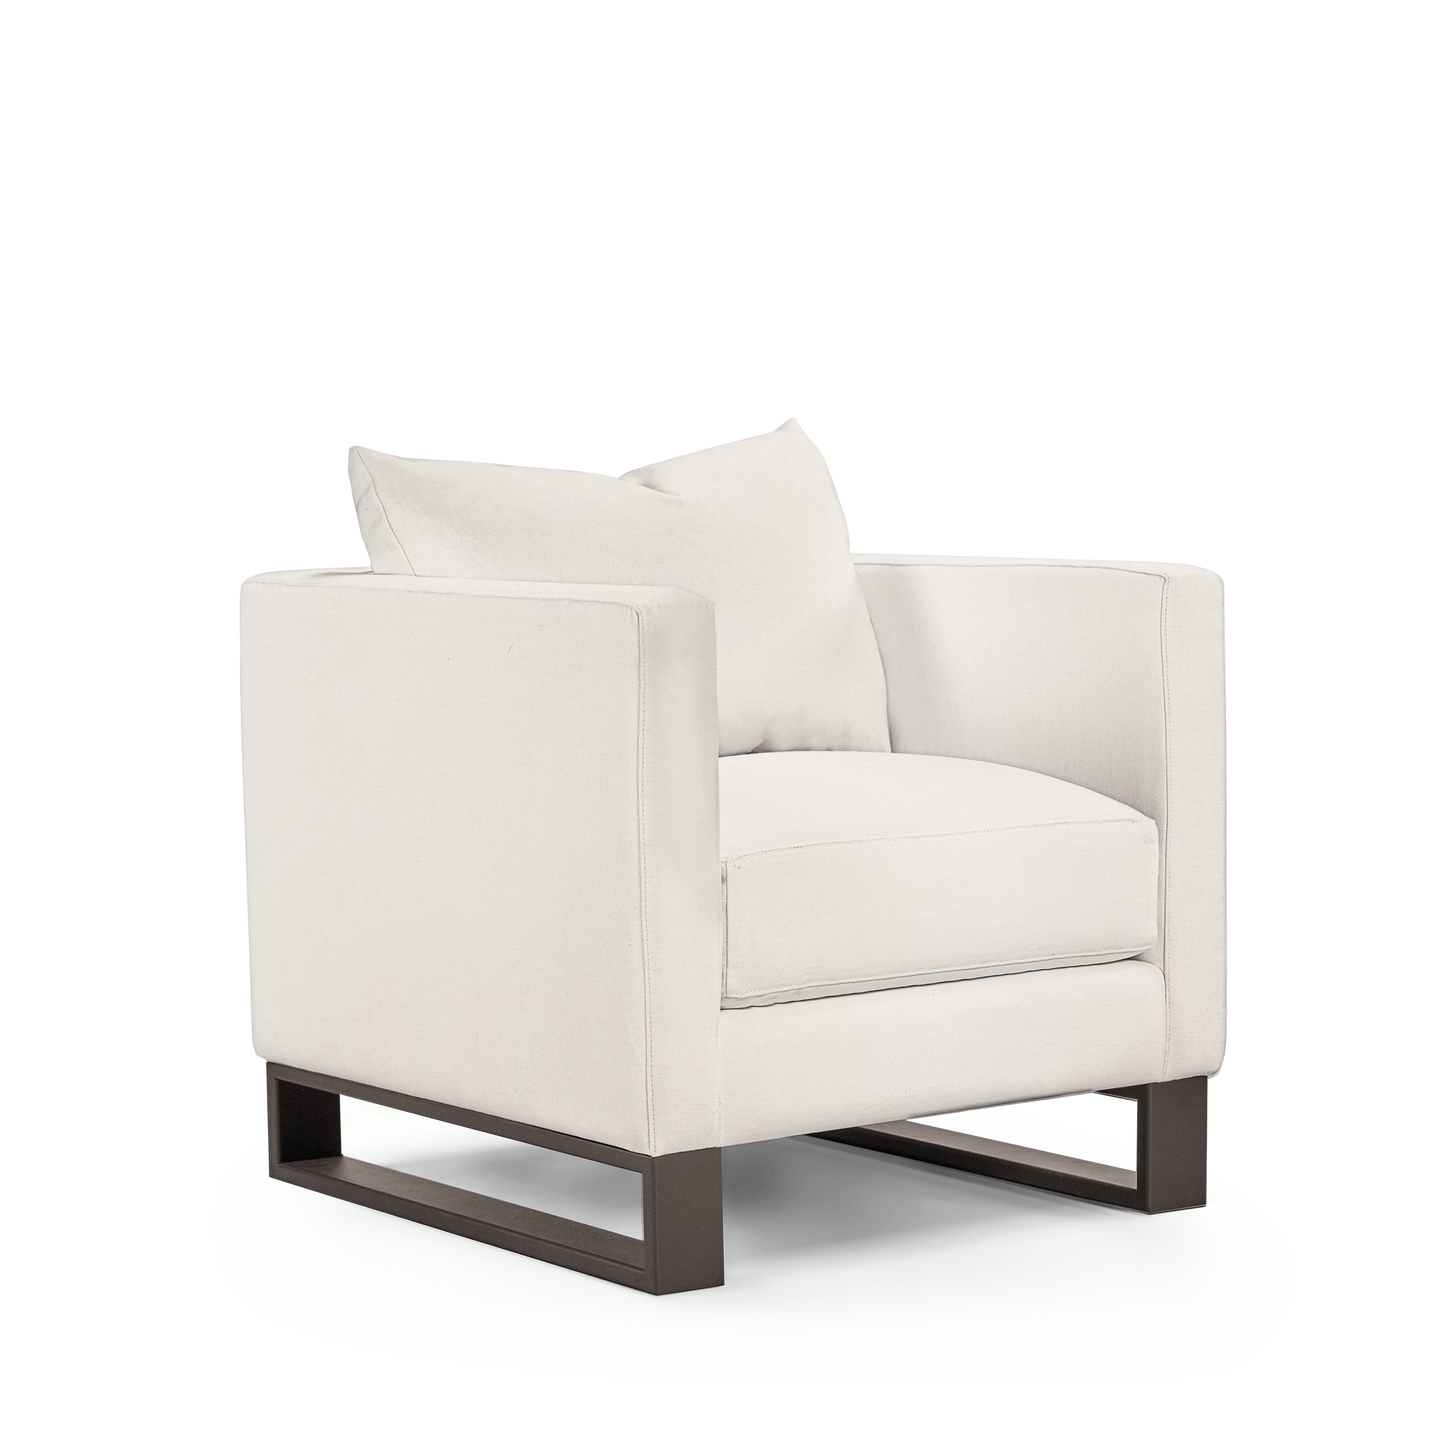 Front view Atlin armchair with white bolt textile with moka legs 